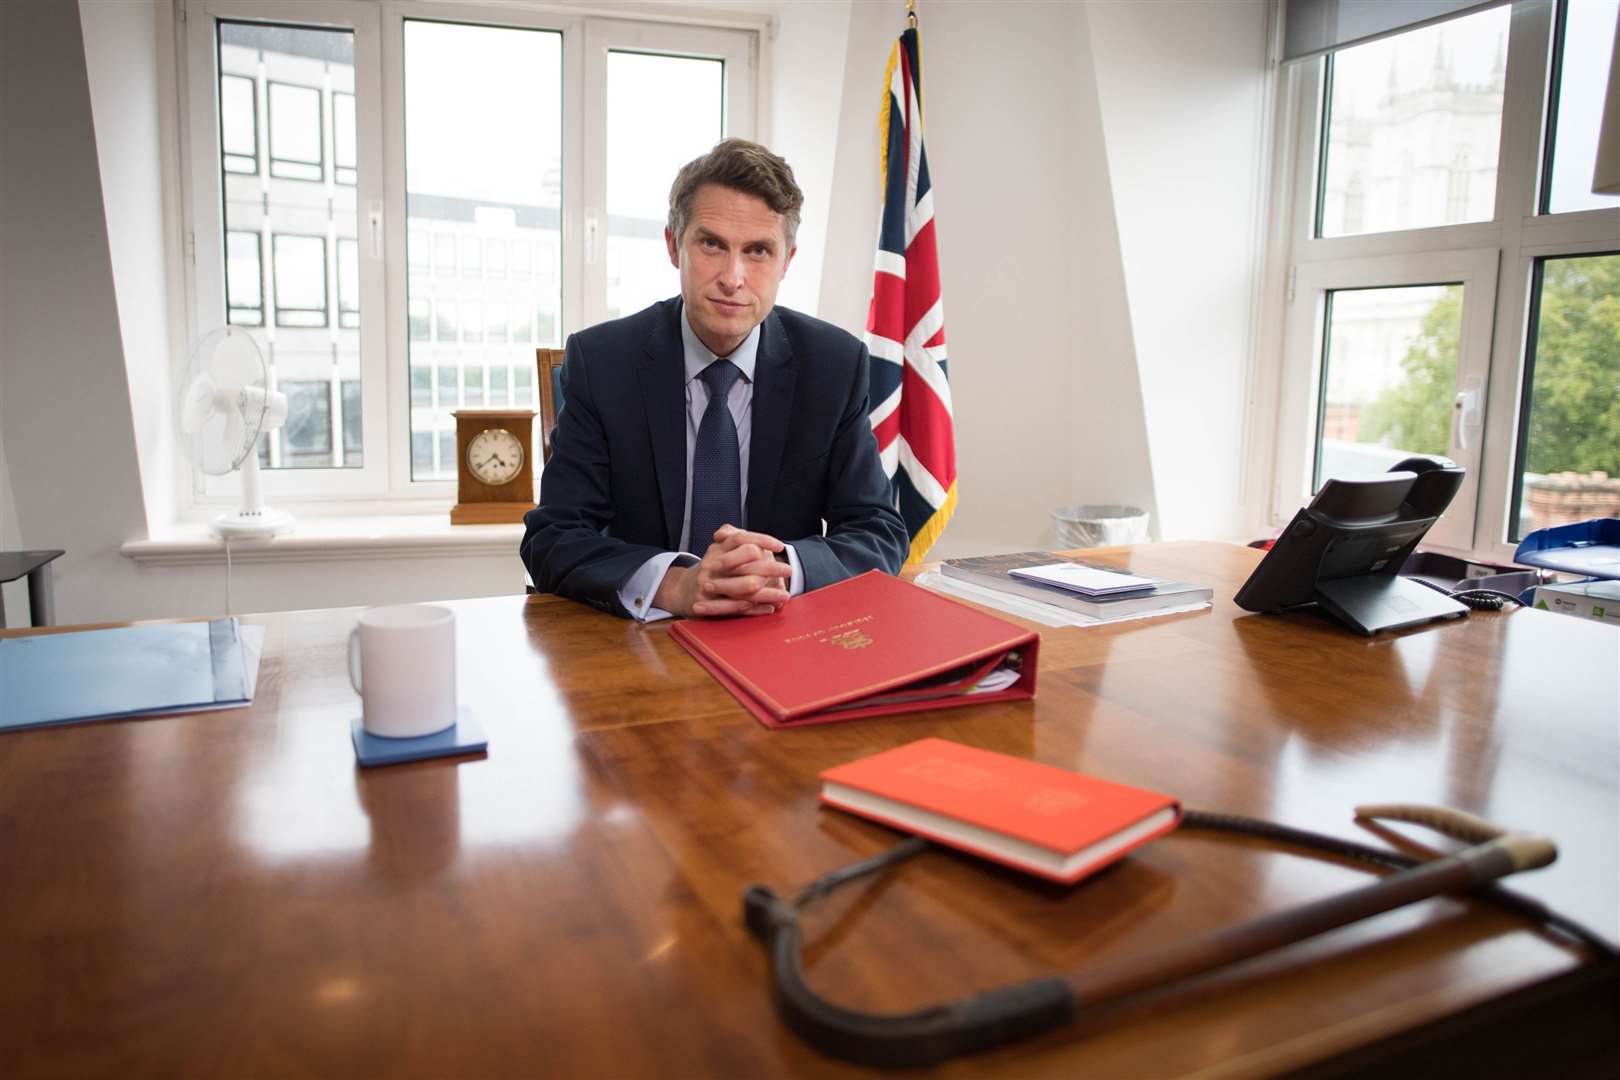 Sir Gavin Williamson vowed to clear his name (Stefan Rousseau/PA)